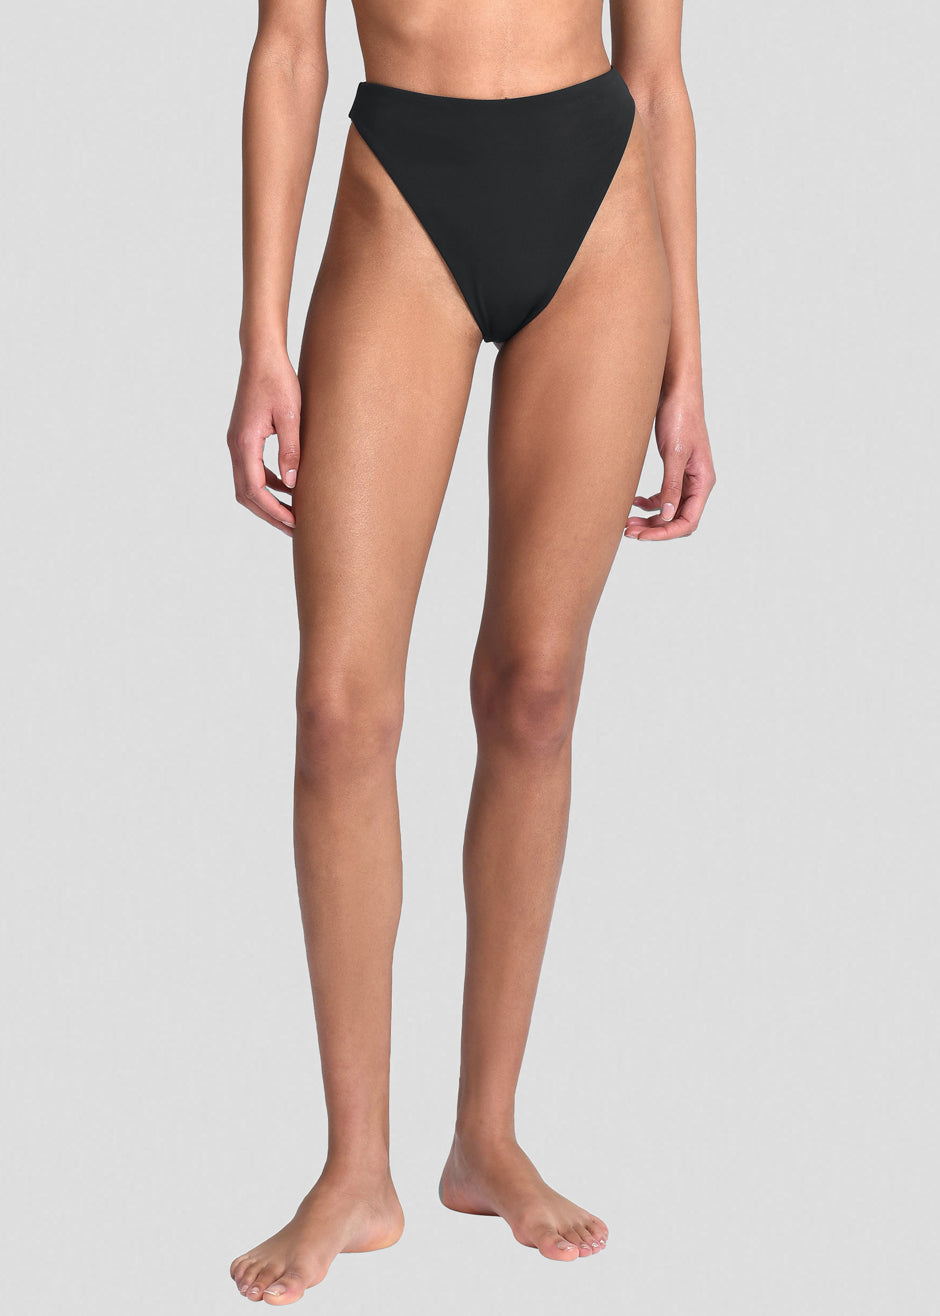 Aexae Triangle High Cut Swimsuit Bottoms - Black - 1